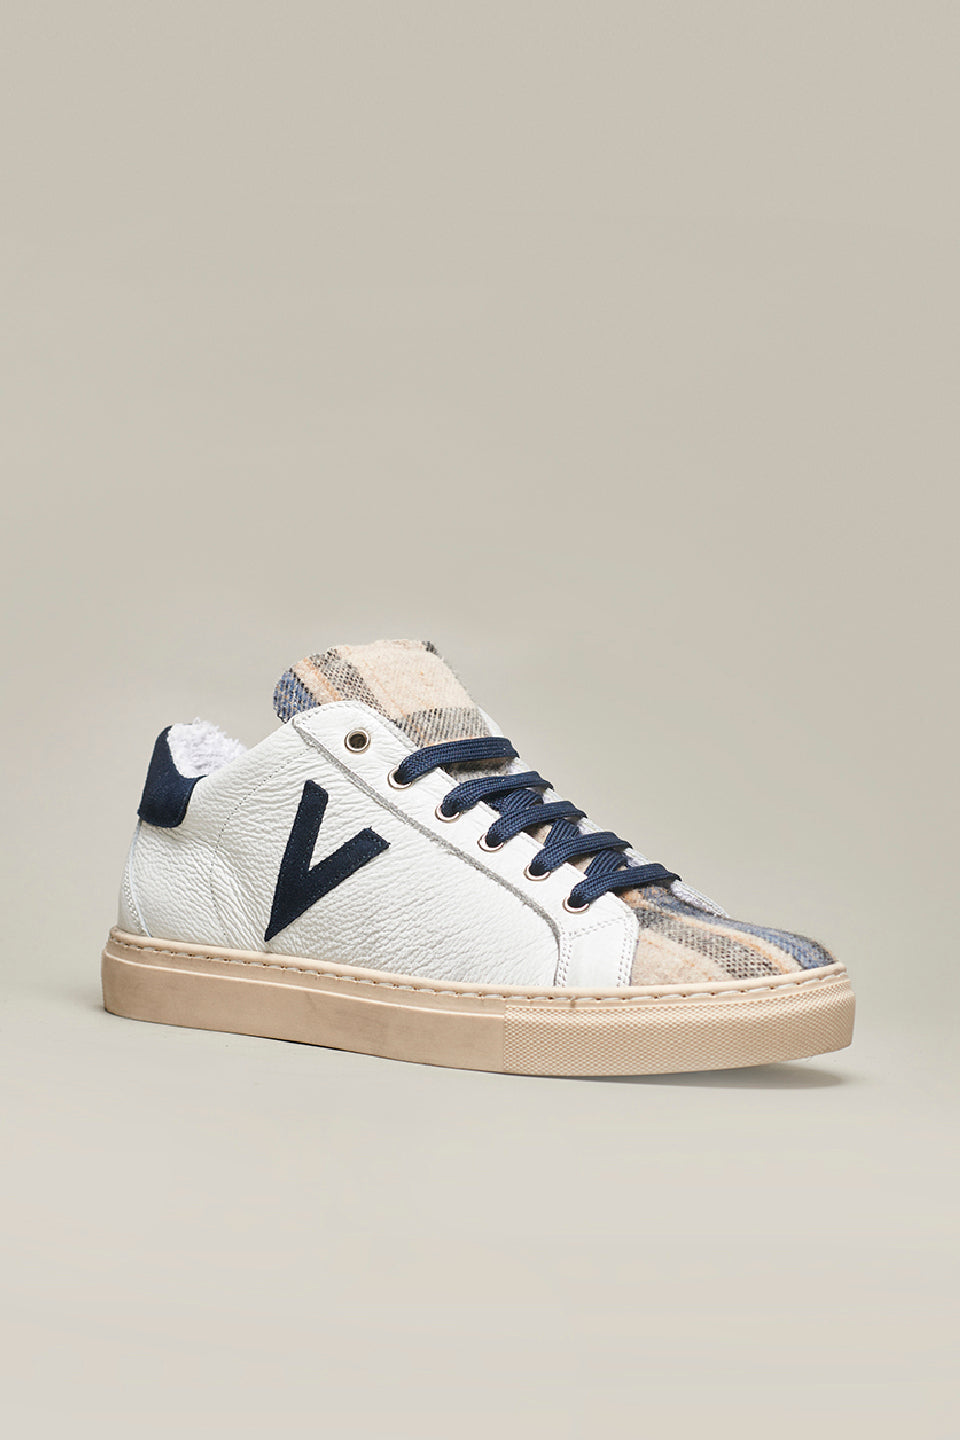 OLYMPIC - White textured leather low sole sneakers with sand tartan fabric tongue